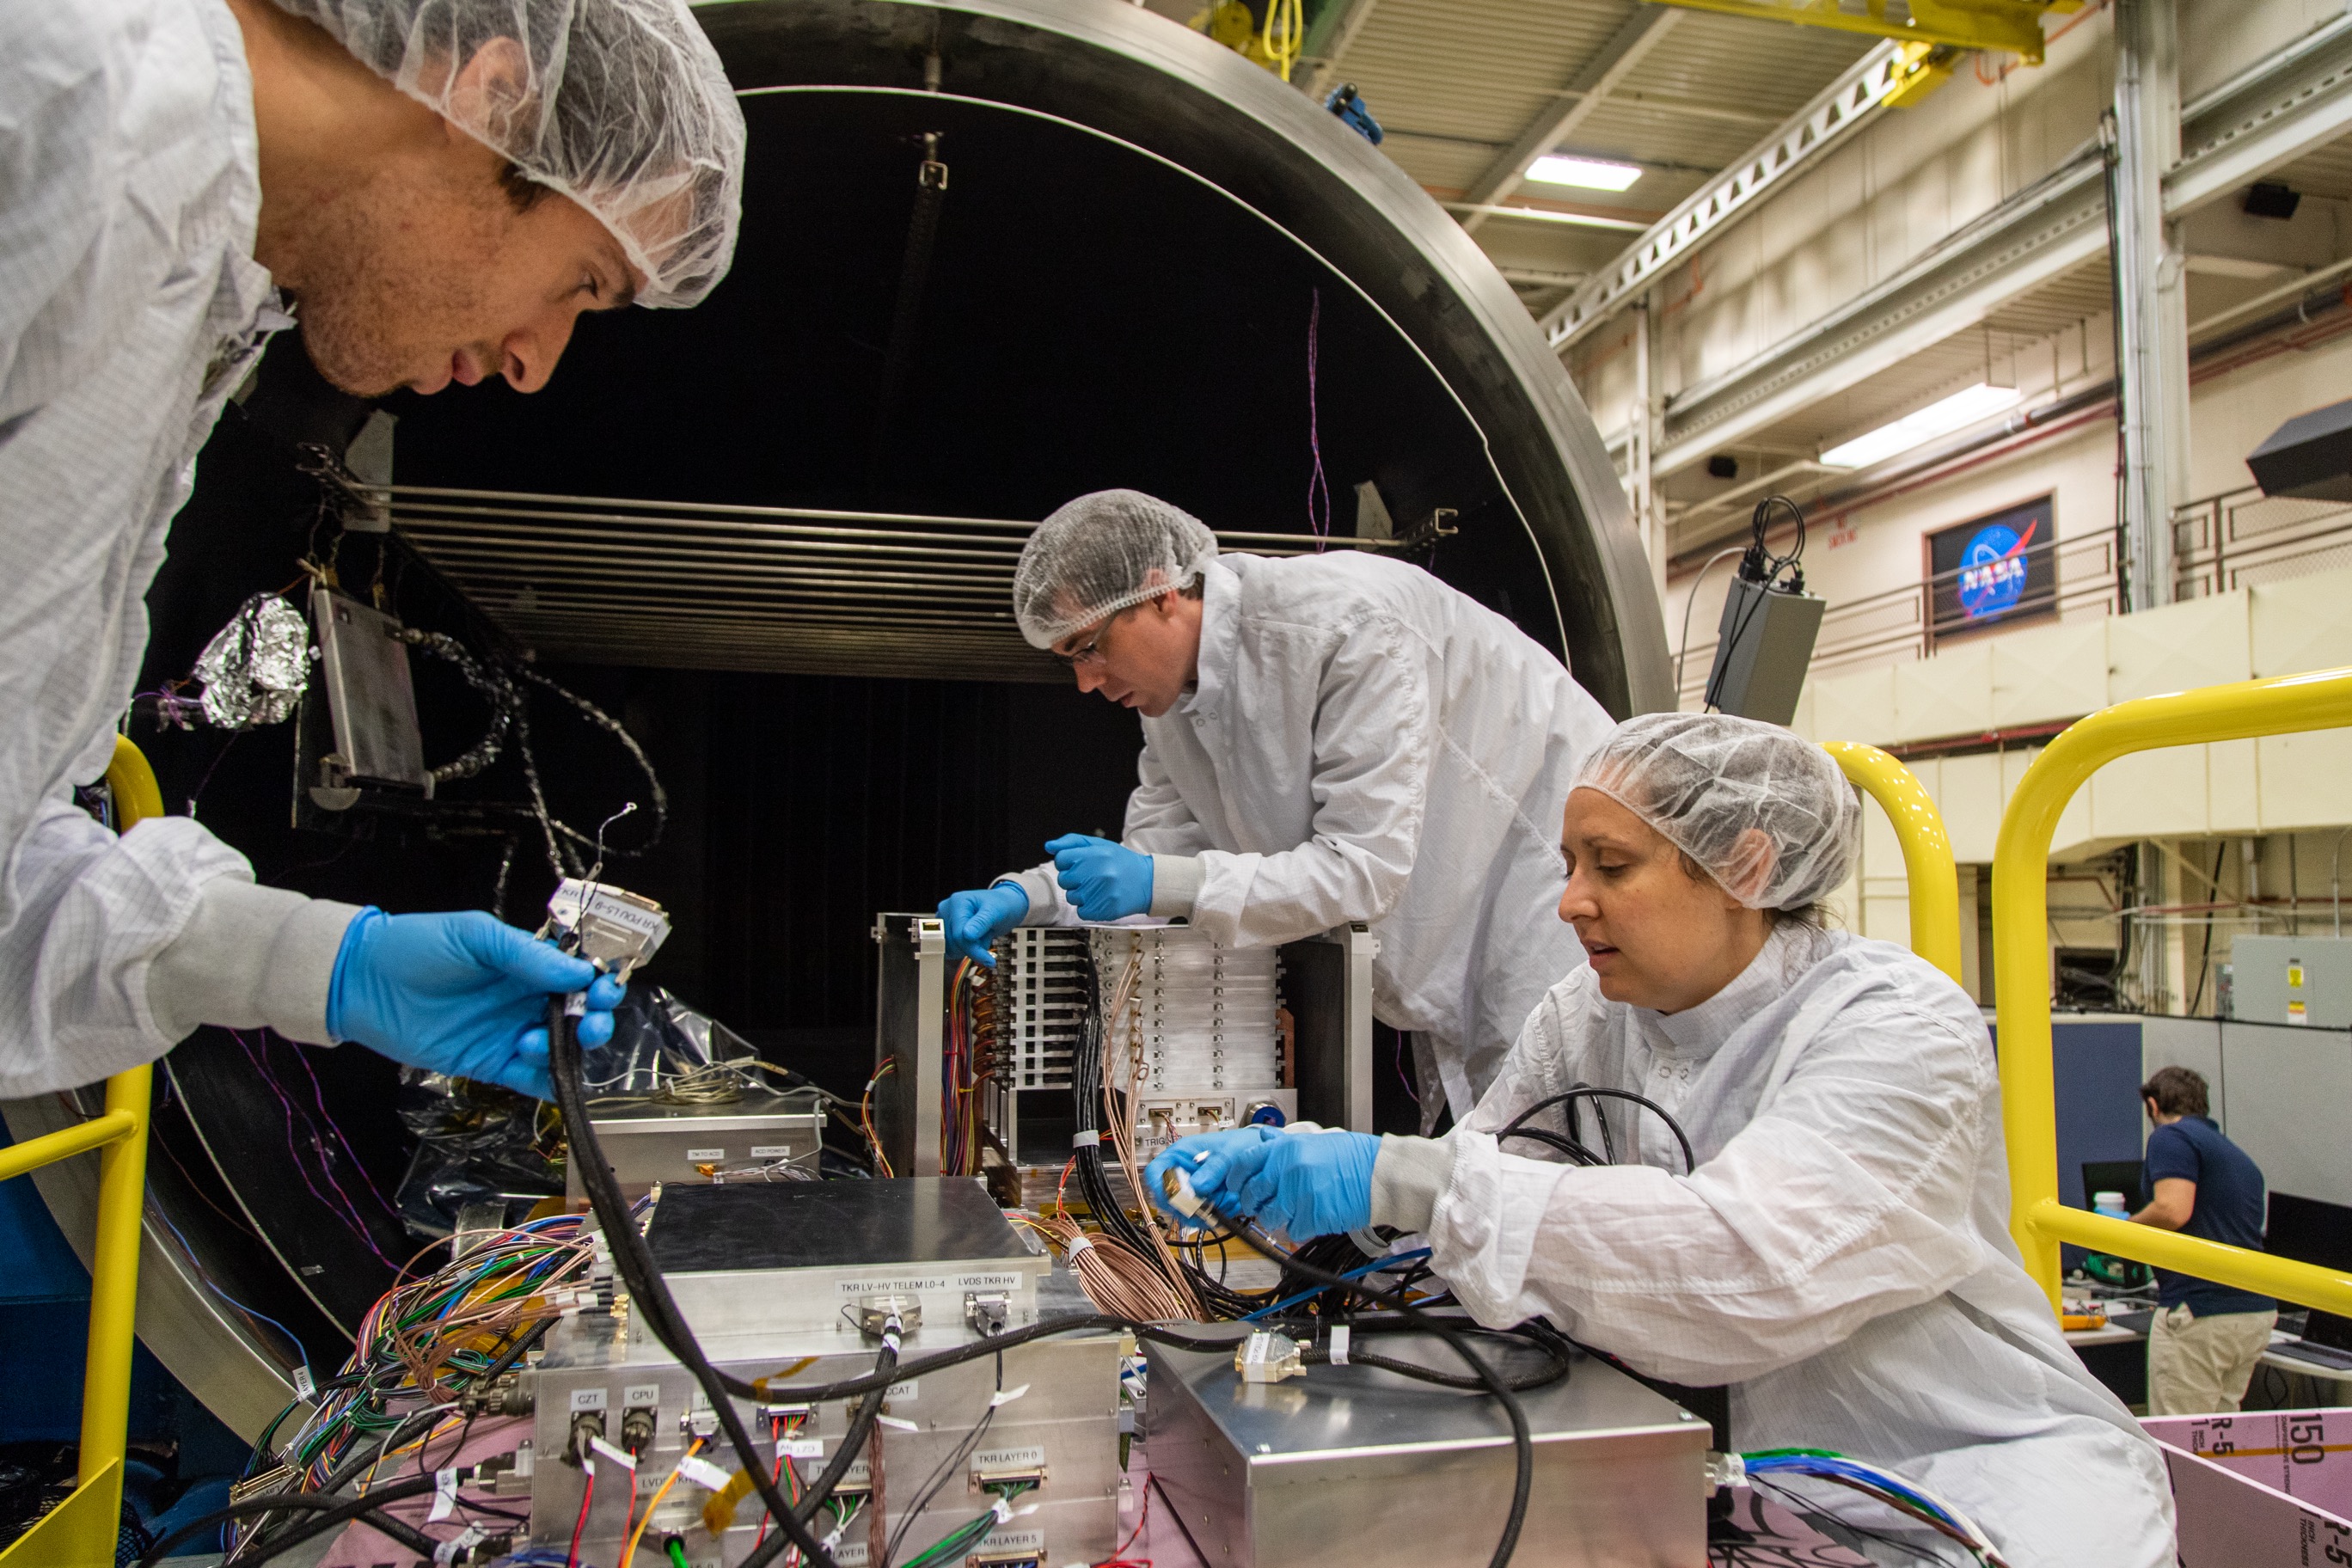 Kirschner (left), Caputo (right), and Cannady (rear) continue to harness ComPair's four main components: tracker, high-resolution low-energy calorimeter, high-energy calorimeter, and anticoincidence detector.Credit: NASA/Scott Wiessinger